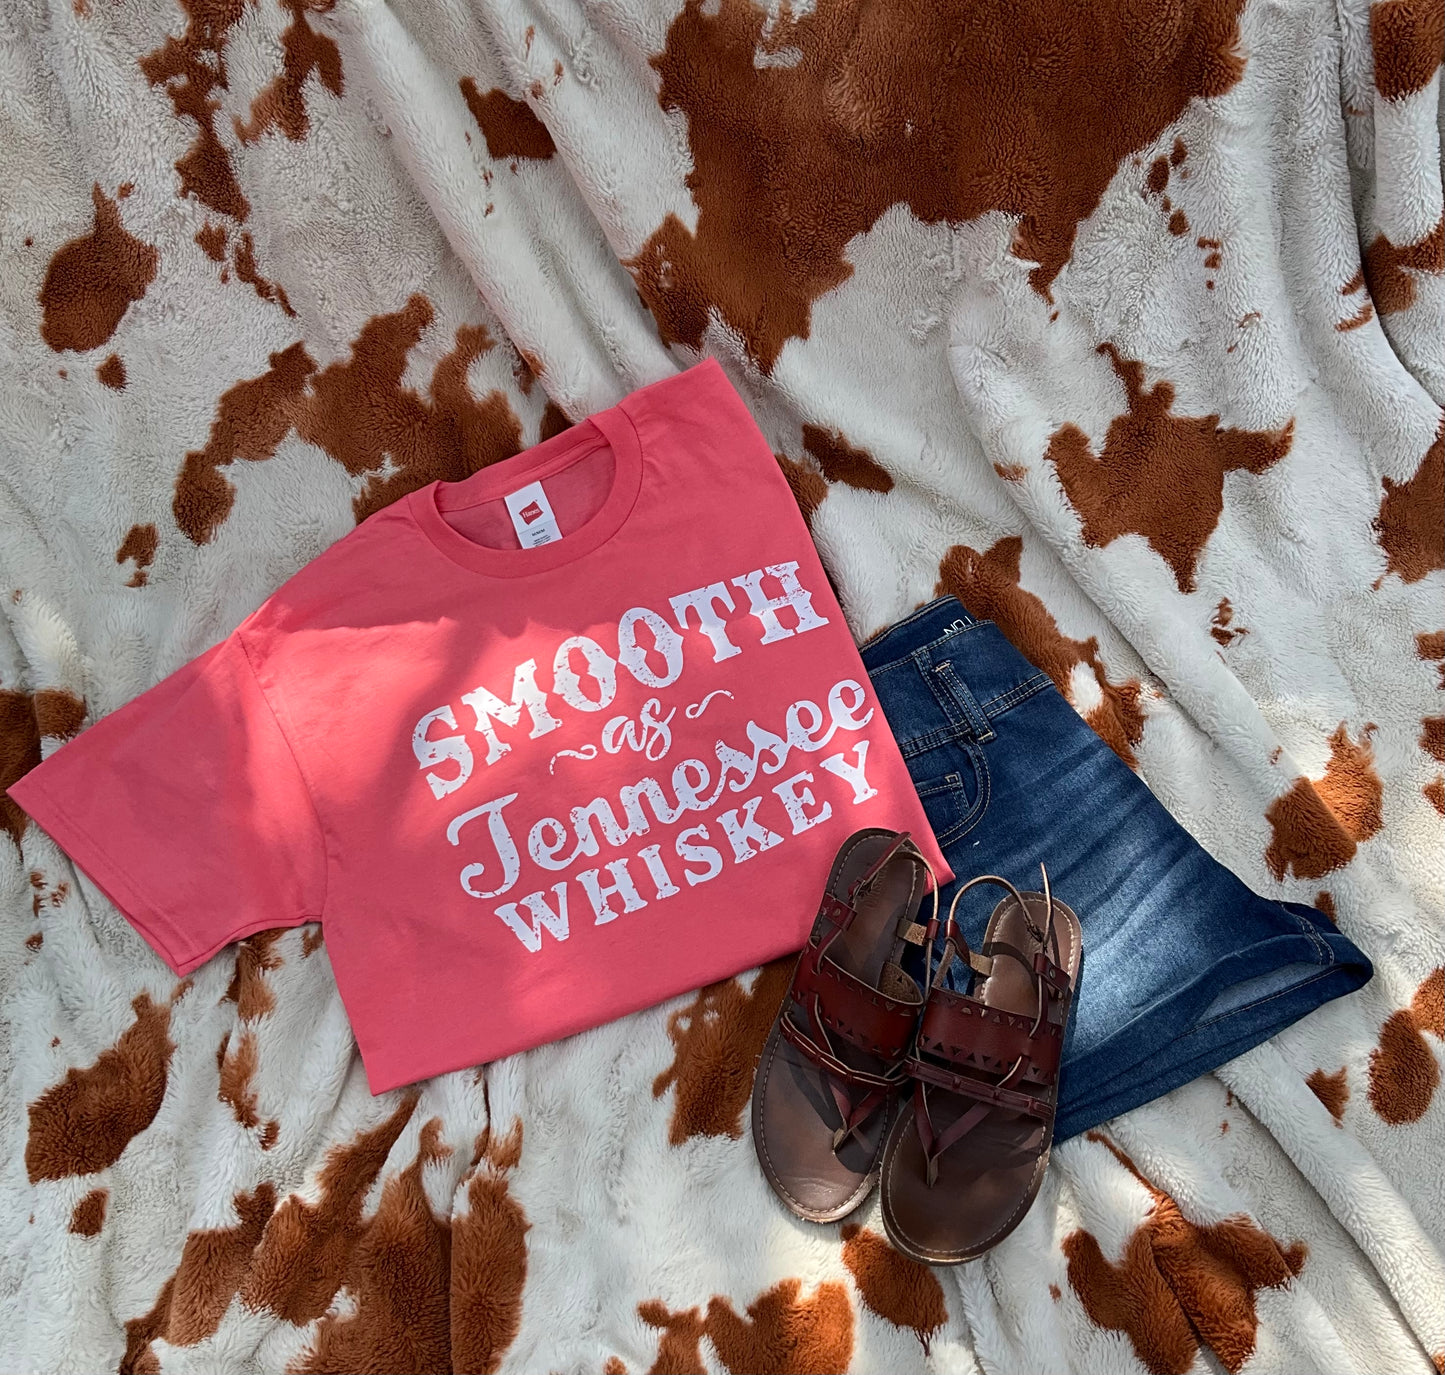 Smooth As Tennessee Whiskey Shirt